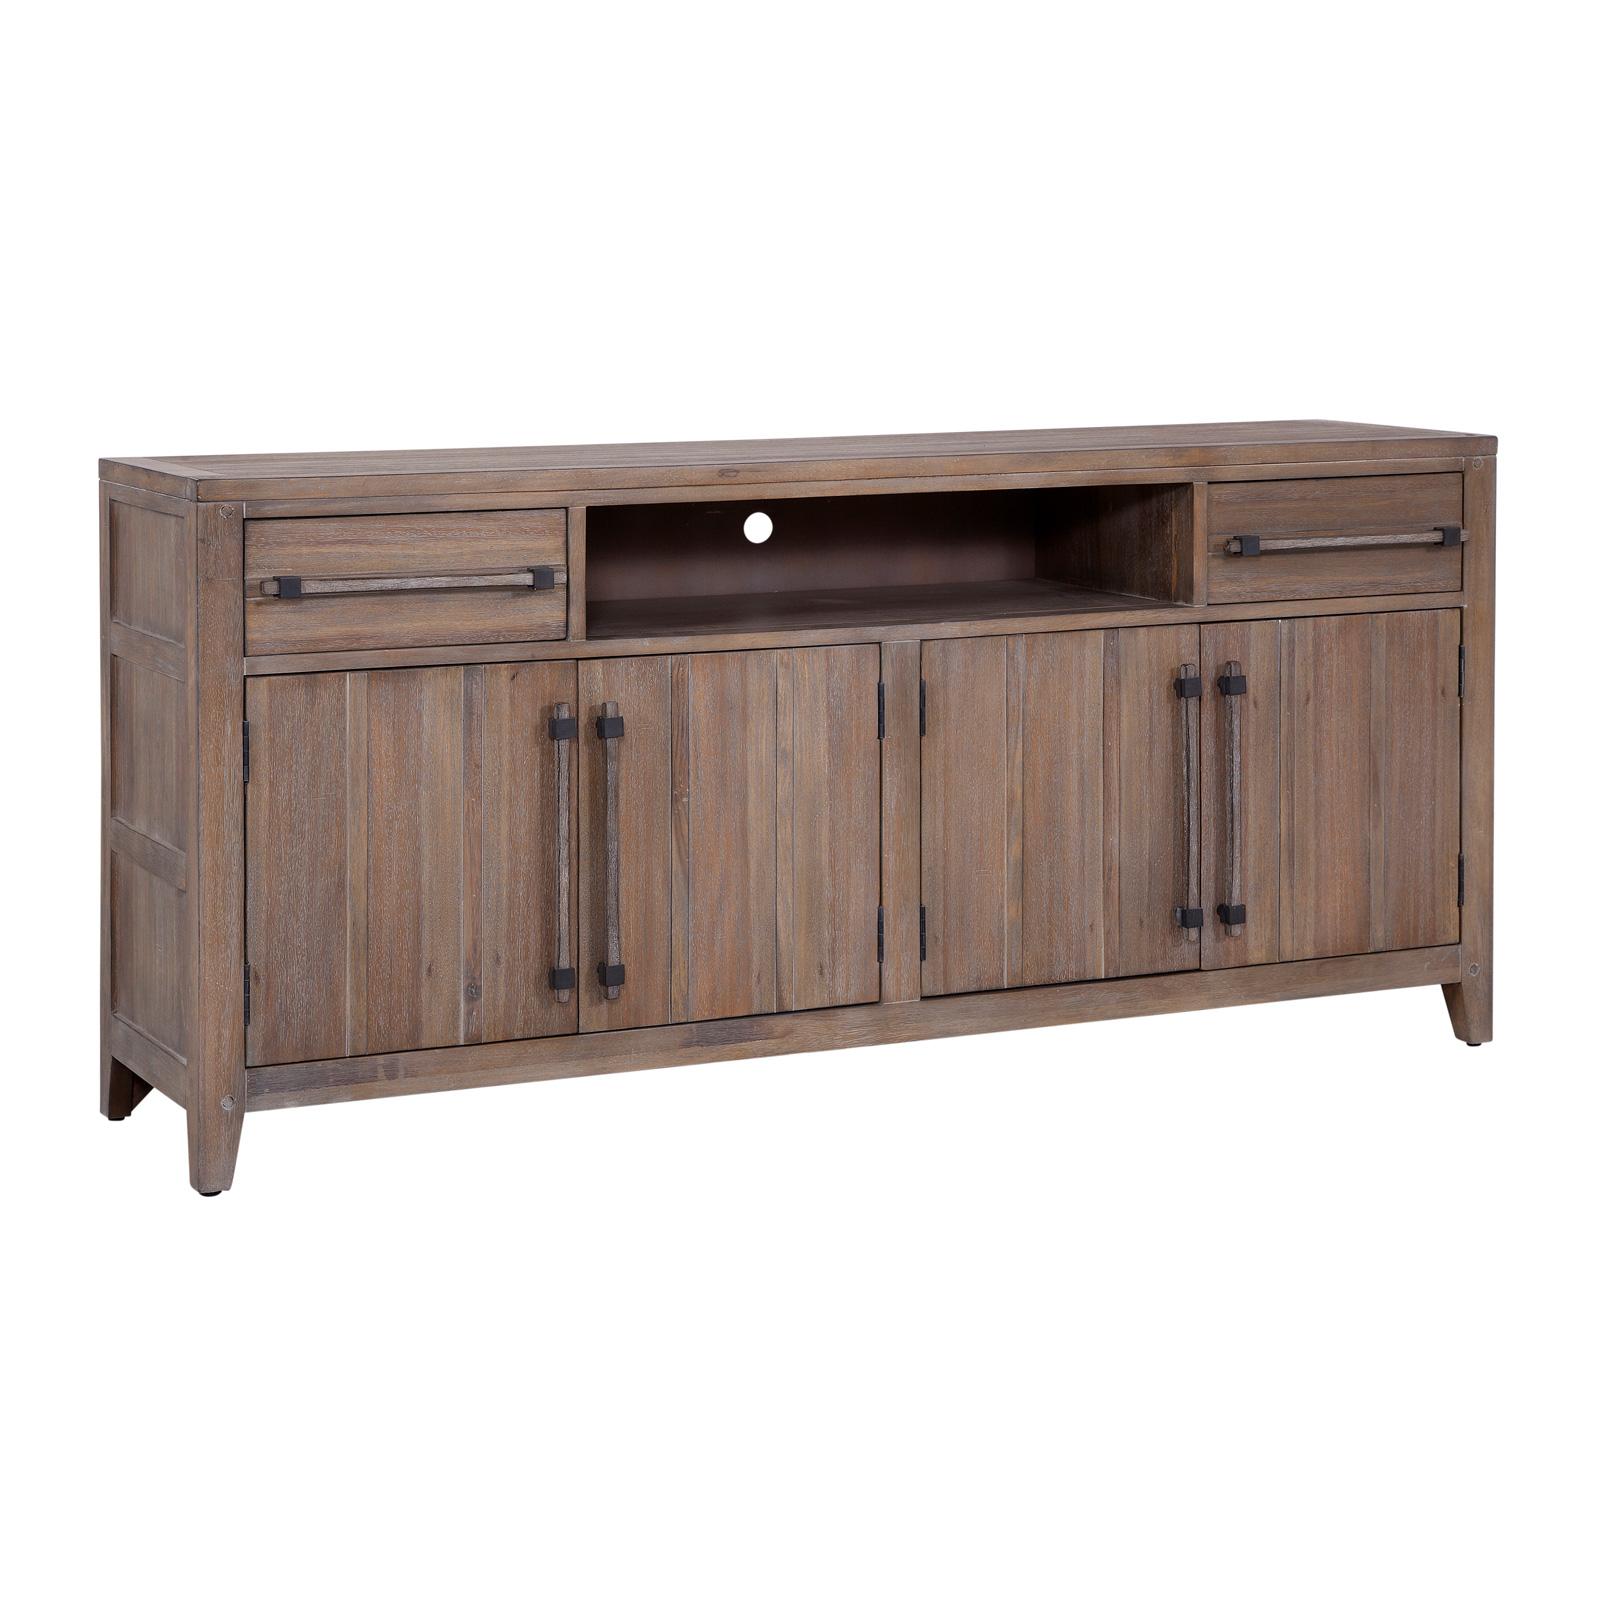 Cottage Tv Console AURORA 2800-224 2800-224 in Driftwood, Gray 